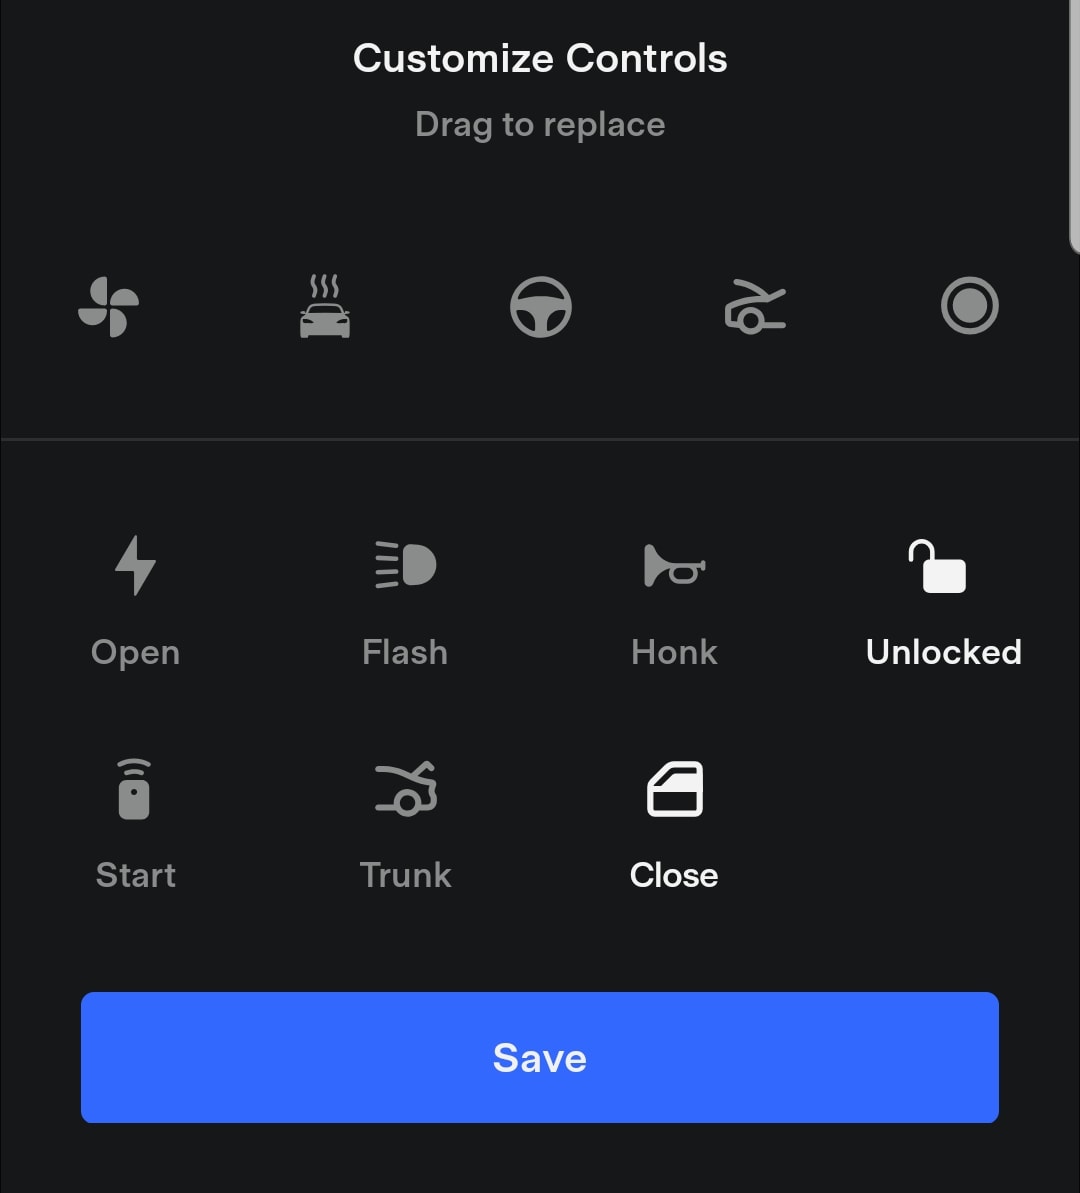 You can add a fifth Quick Control icon to the Tesla app